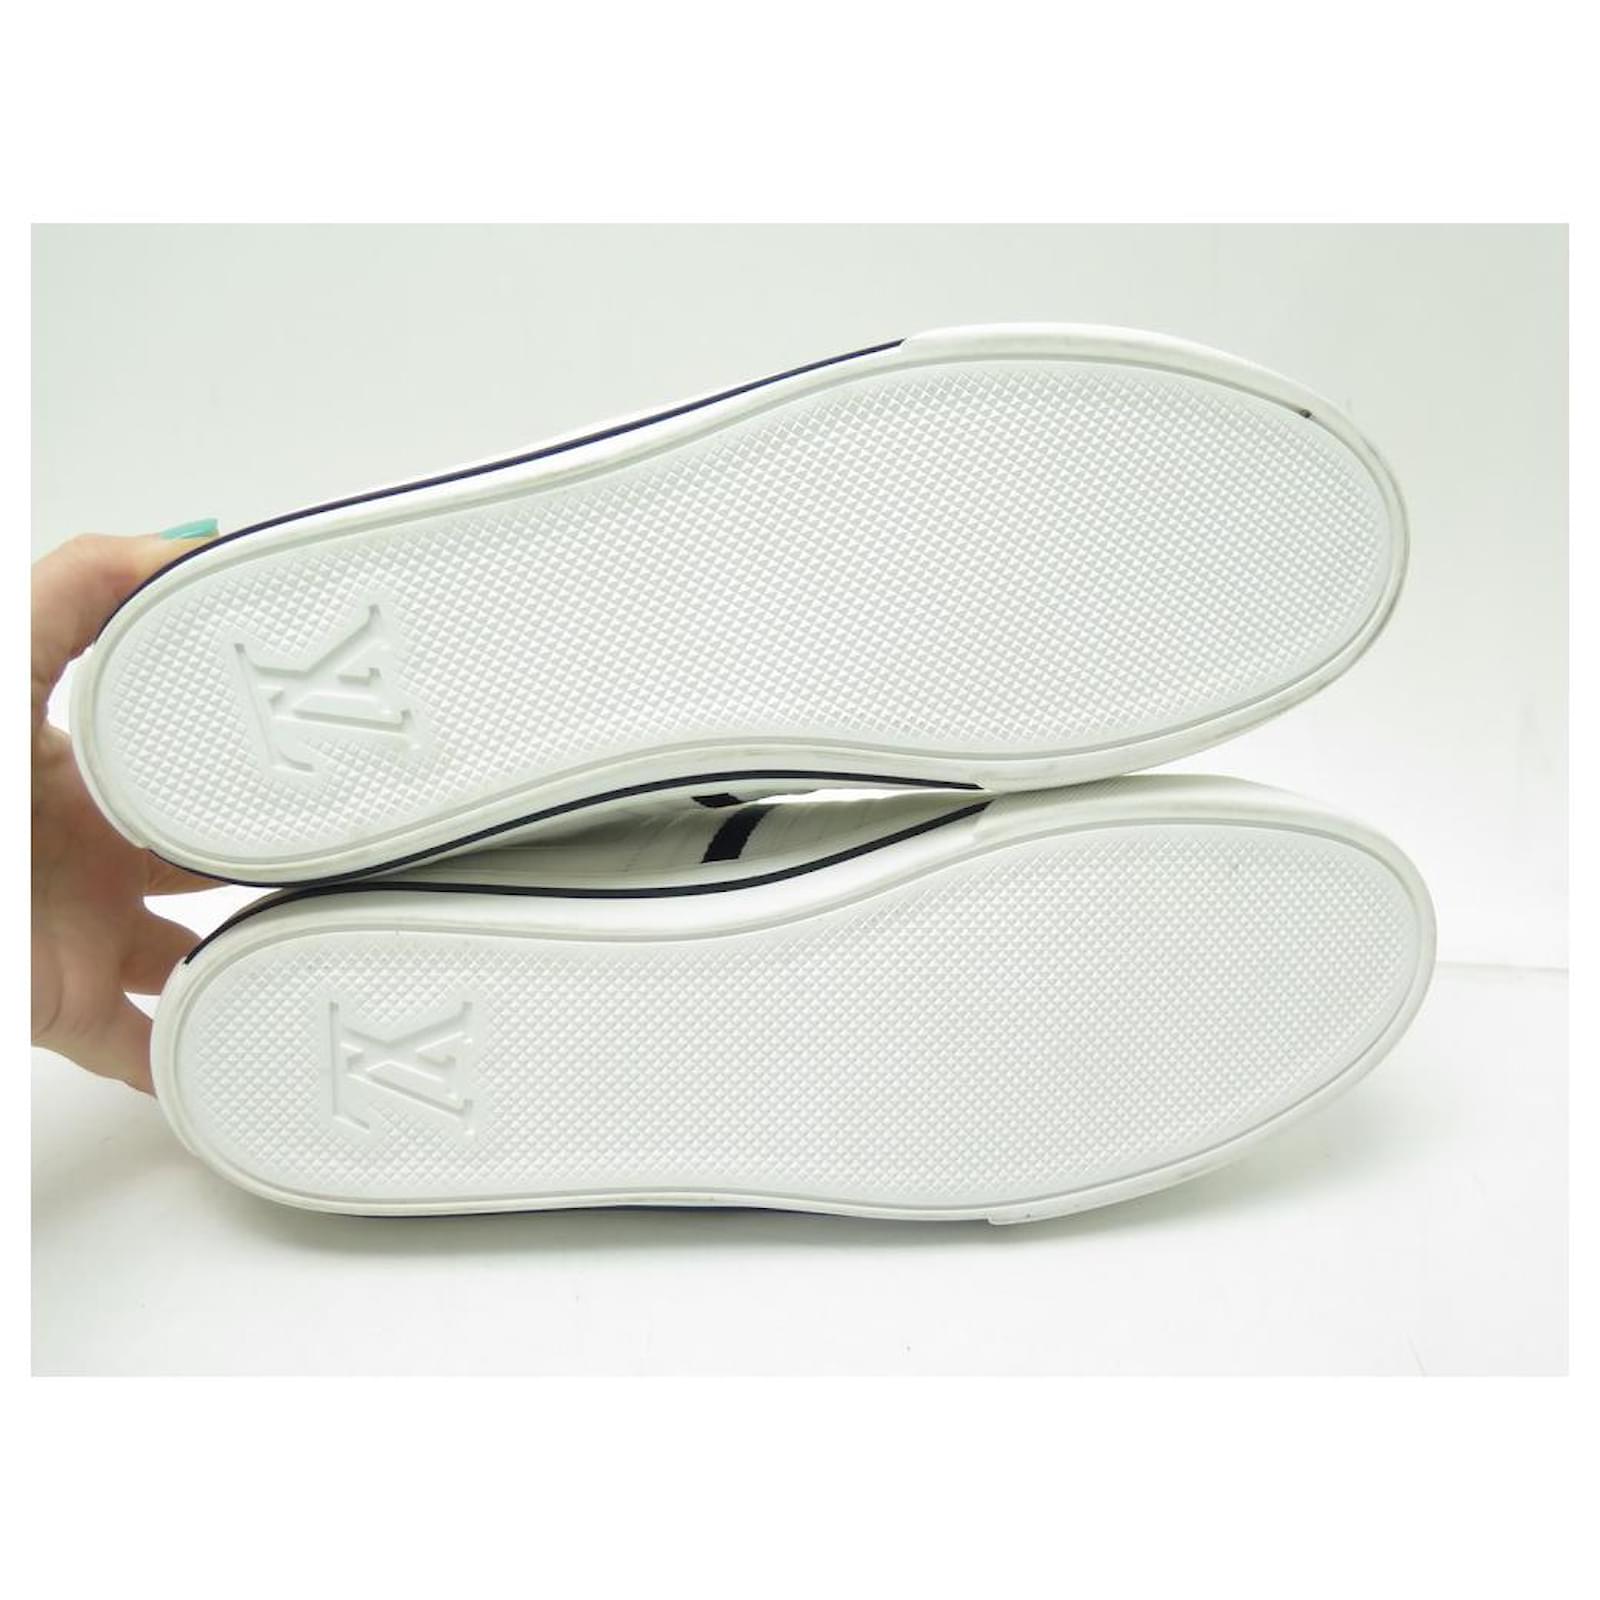 LOUIS VUITTON sneakers SHOES 9 43 IN WHITE LEATHER + BOX SNEAKERS SHOES  ref.340906 - Joli Closet